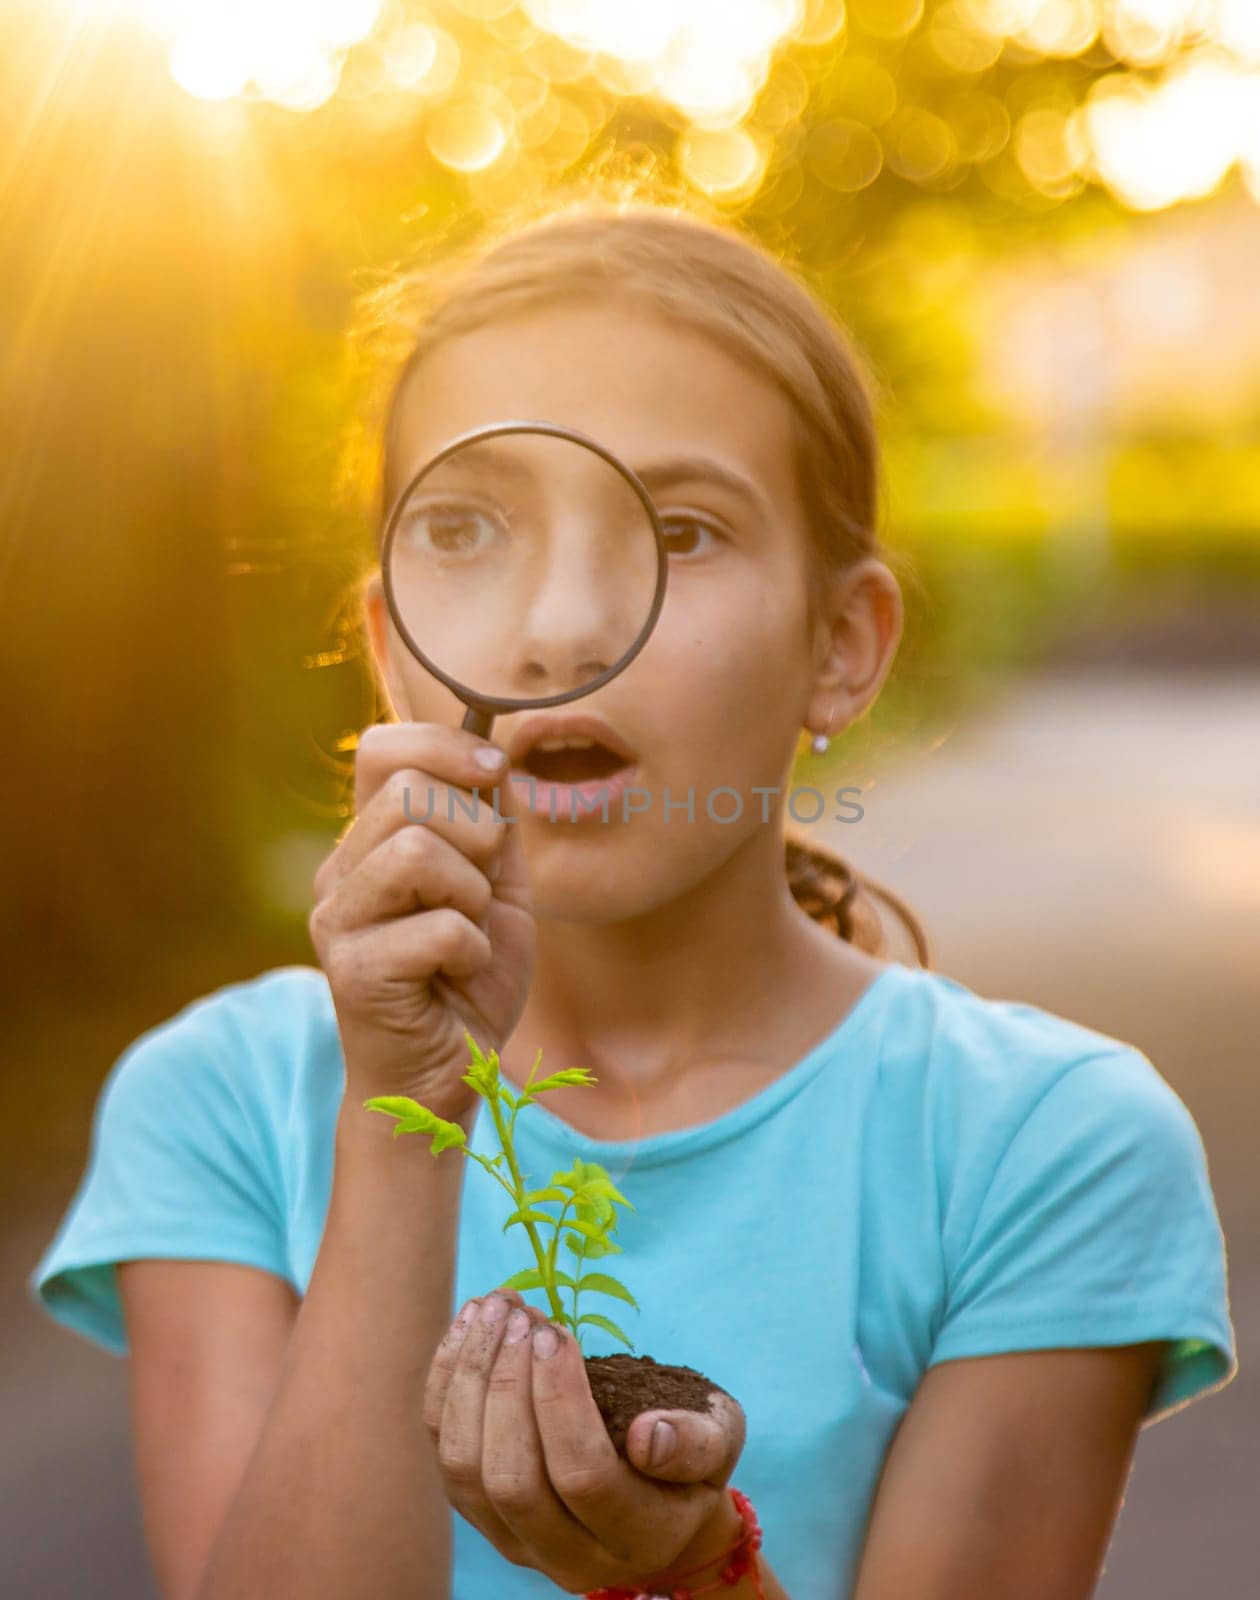 A child looks at a plant in his hands with a magnifying glass. Selective focus. Kid.